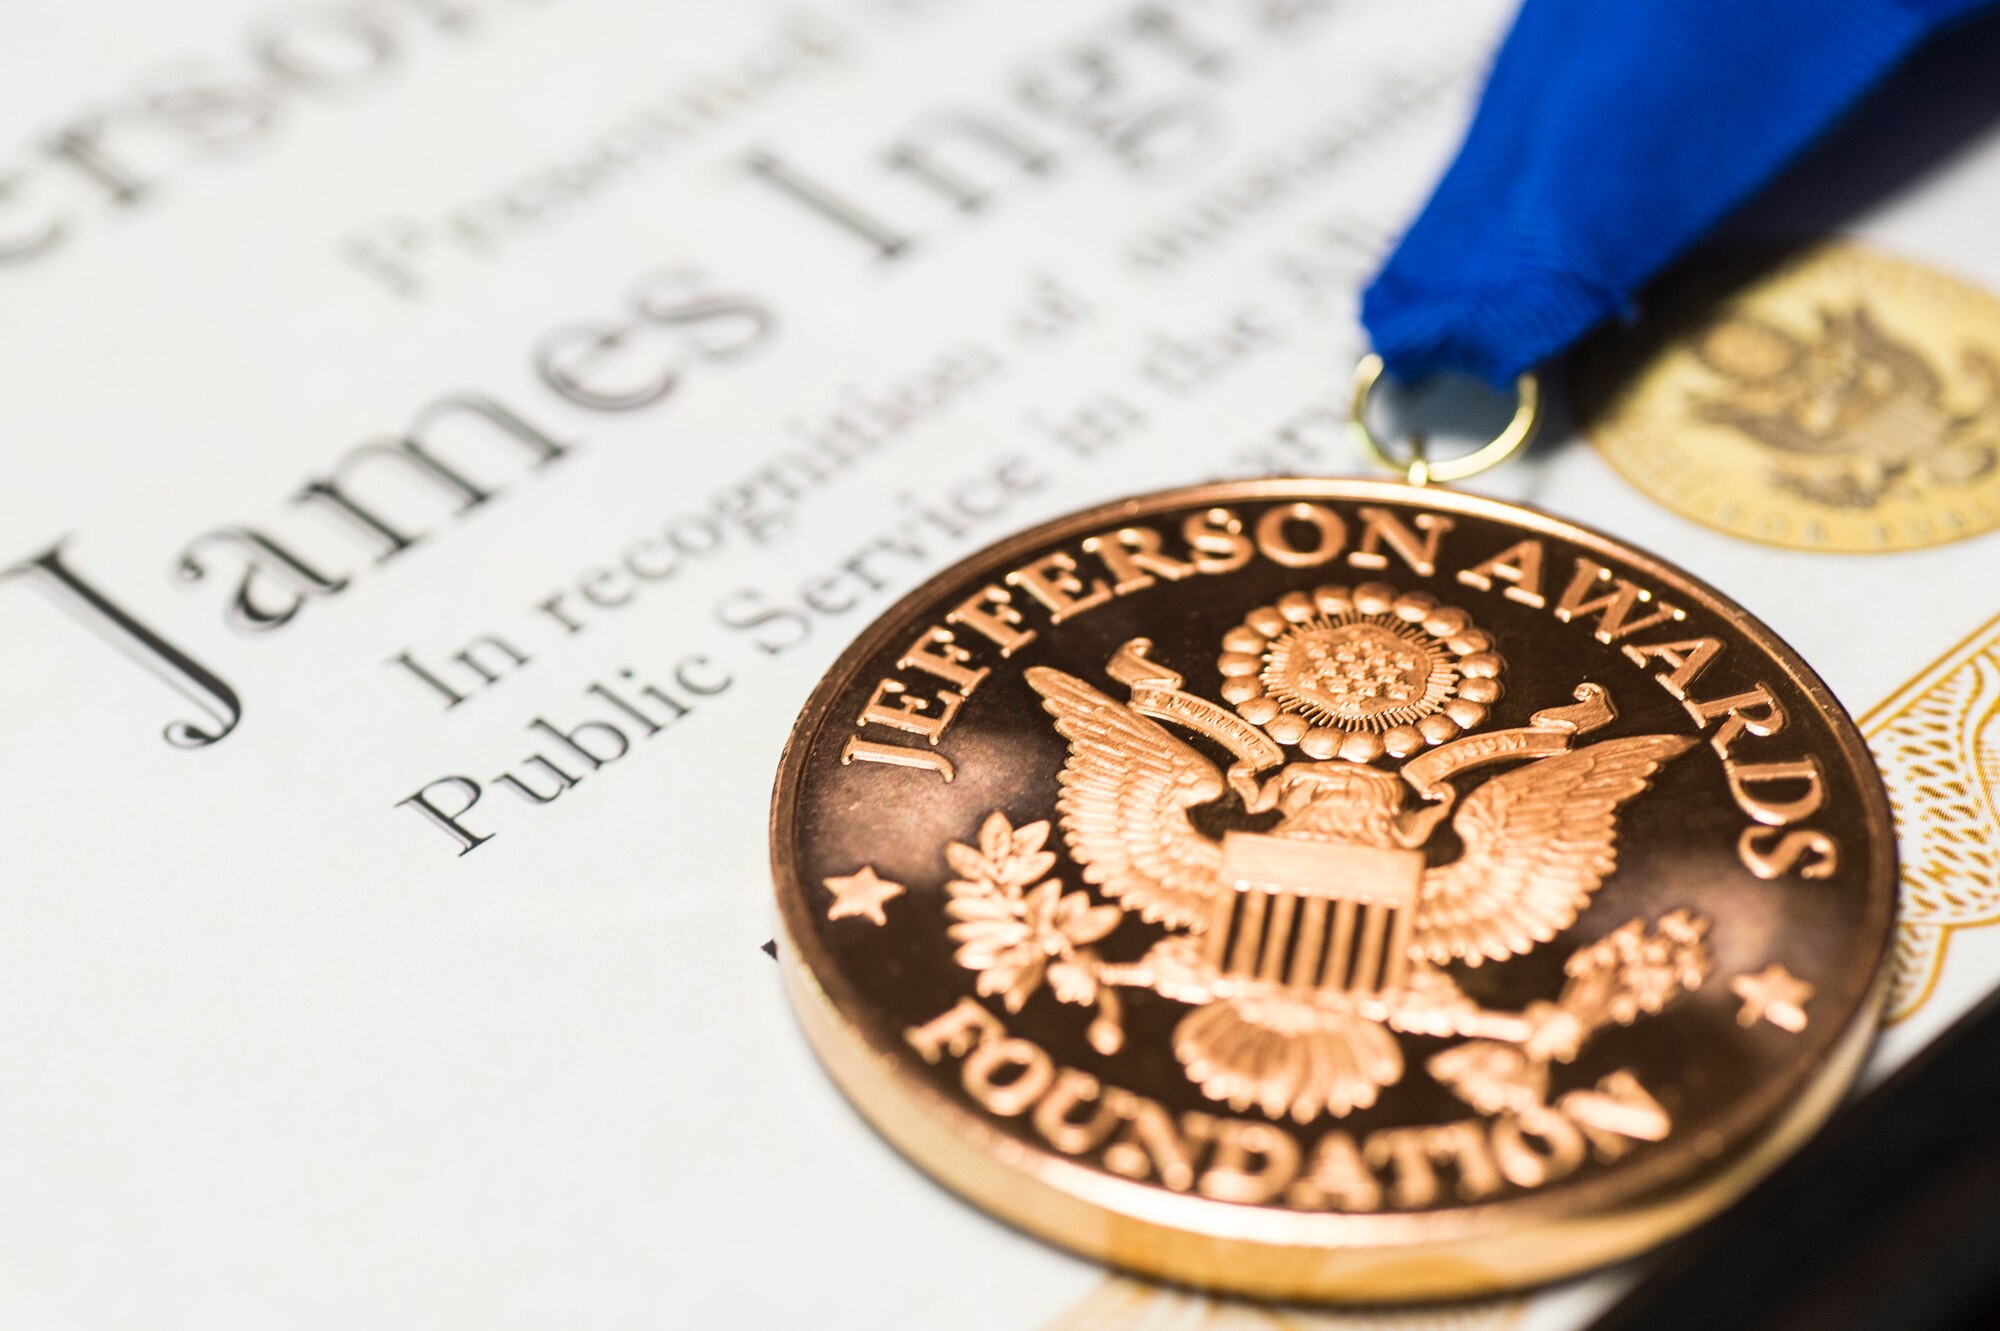 A Jefferson Award medal and certificate rest on a table, Jan. 12, 2016, at Moody Air Force Base, Ga. The Jefferson Award recognizes the achievements of leaders in the community for their outstanding public service. (U.S. Air Force photo by Senior Airman Ceaira Tinsley/Released)